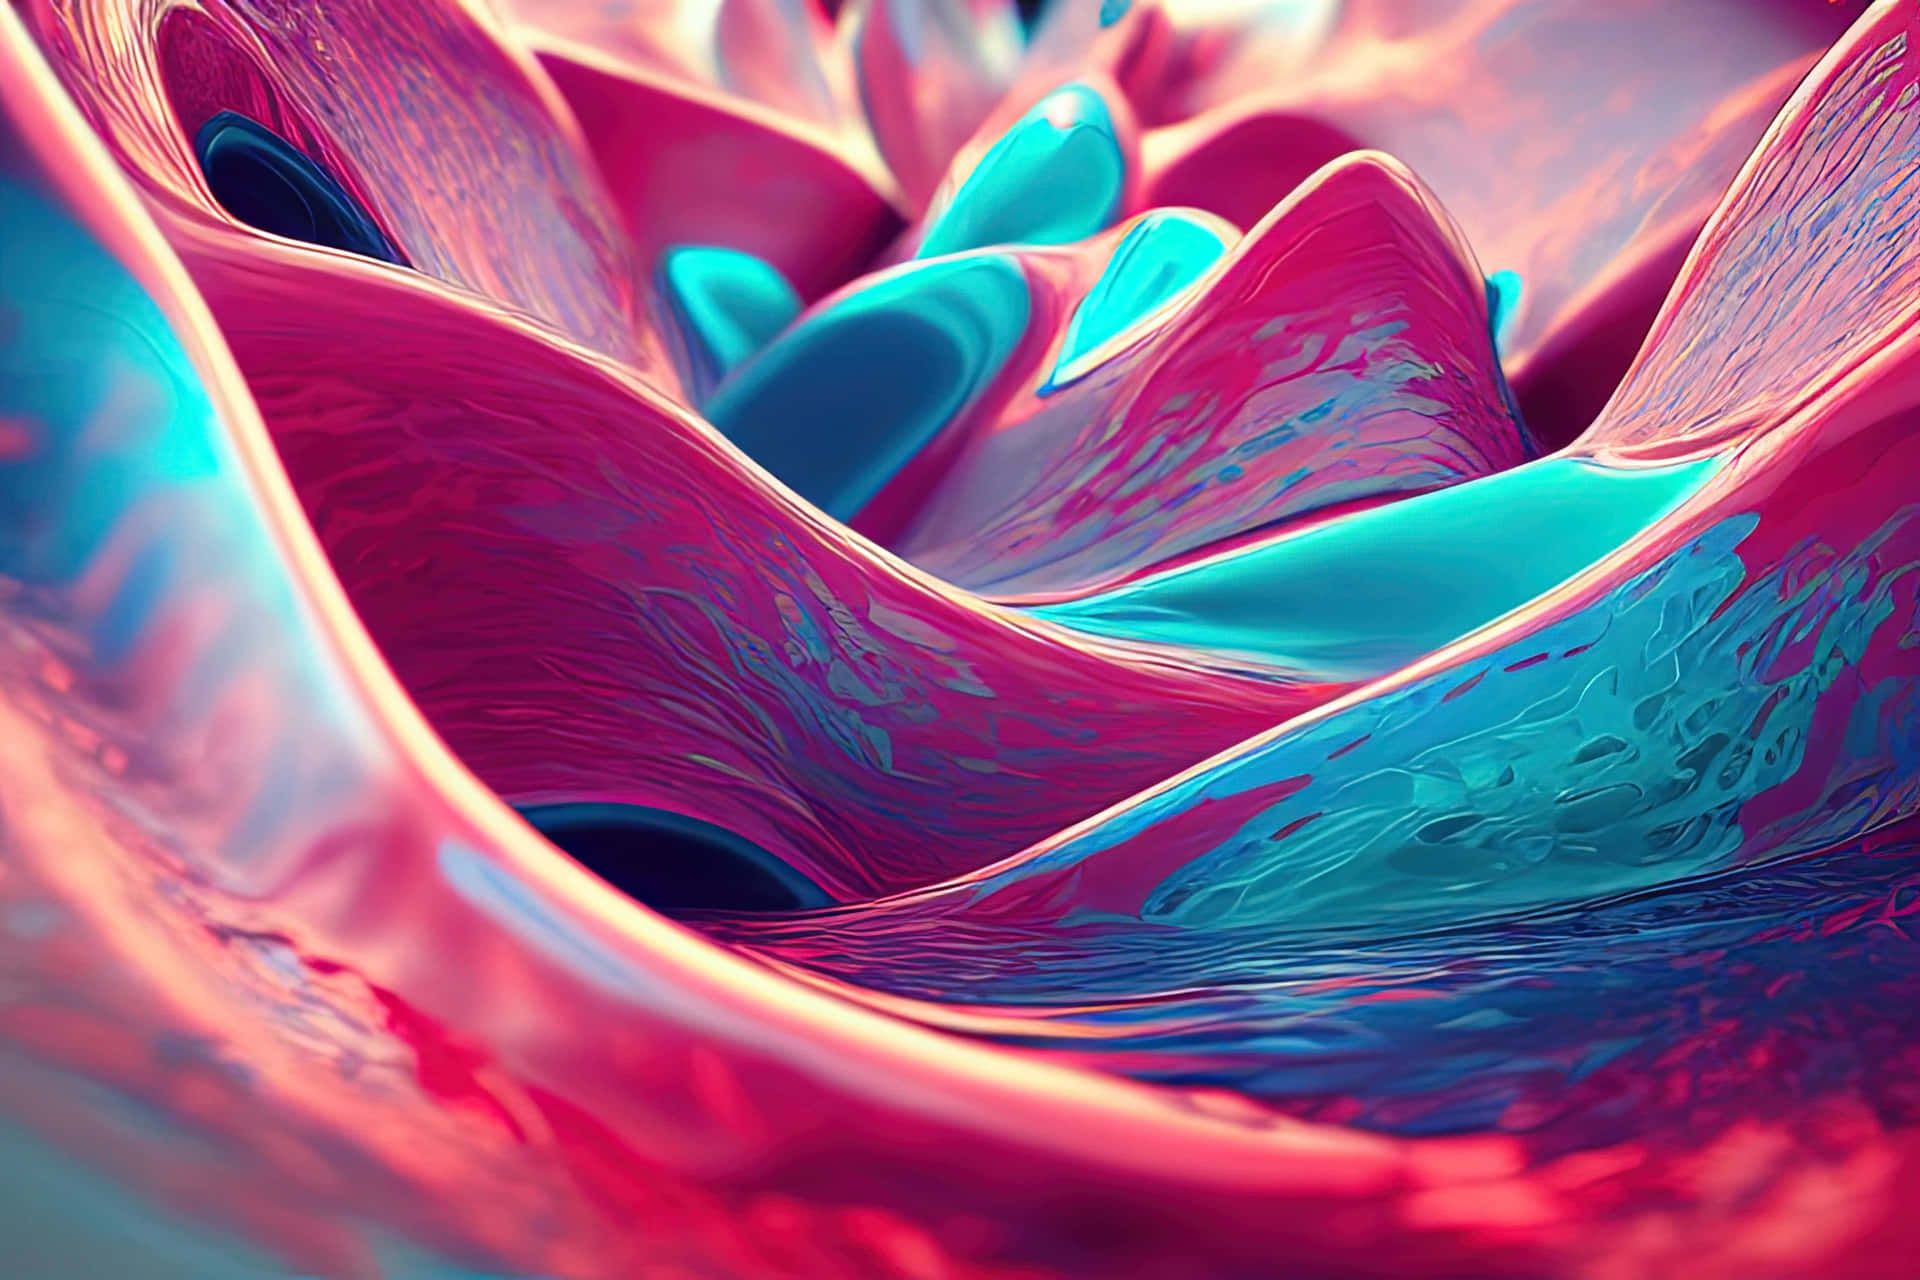 A Pink And Blue Flower With Water